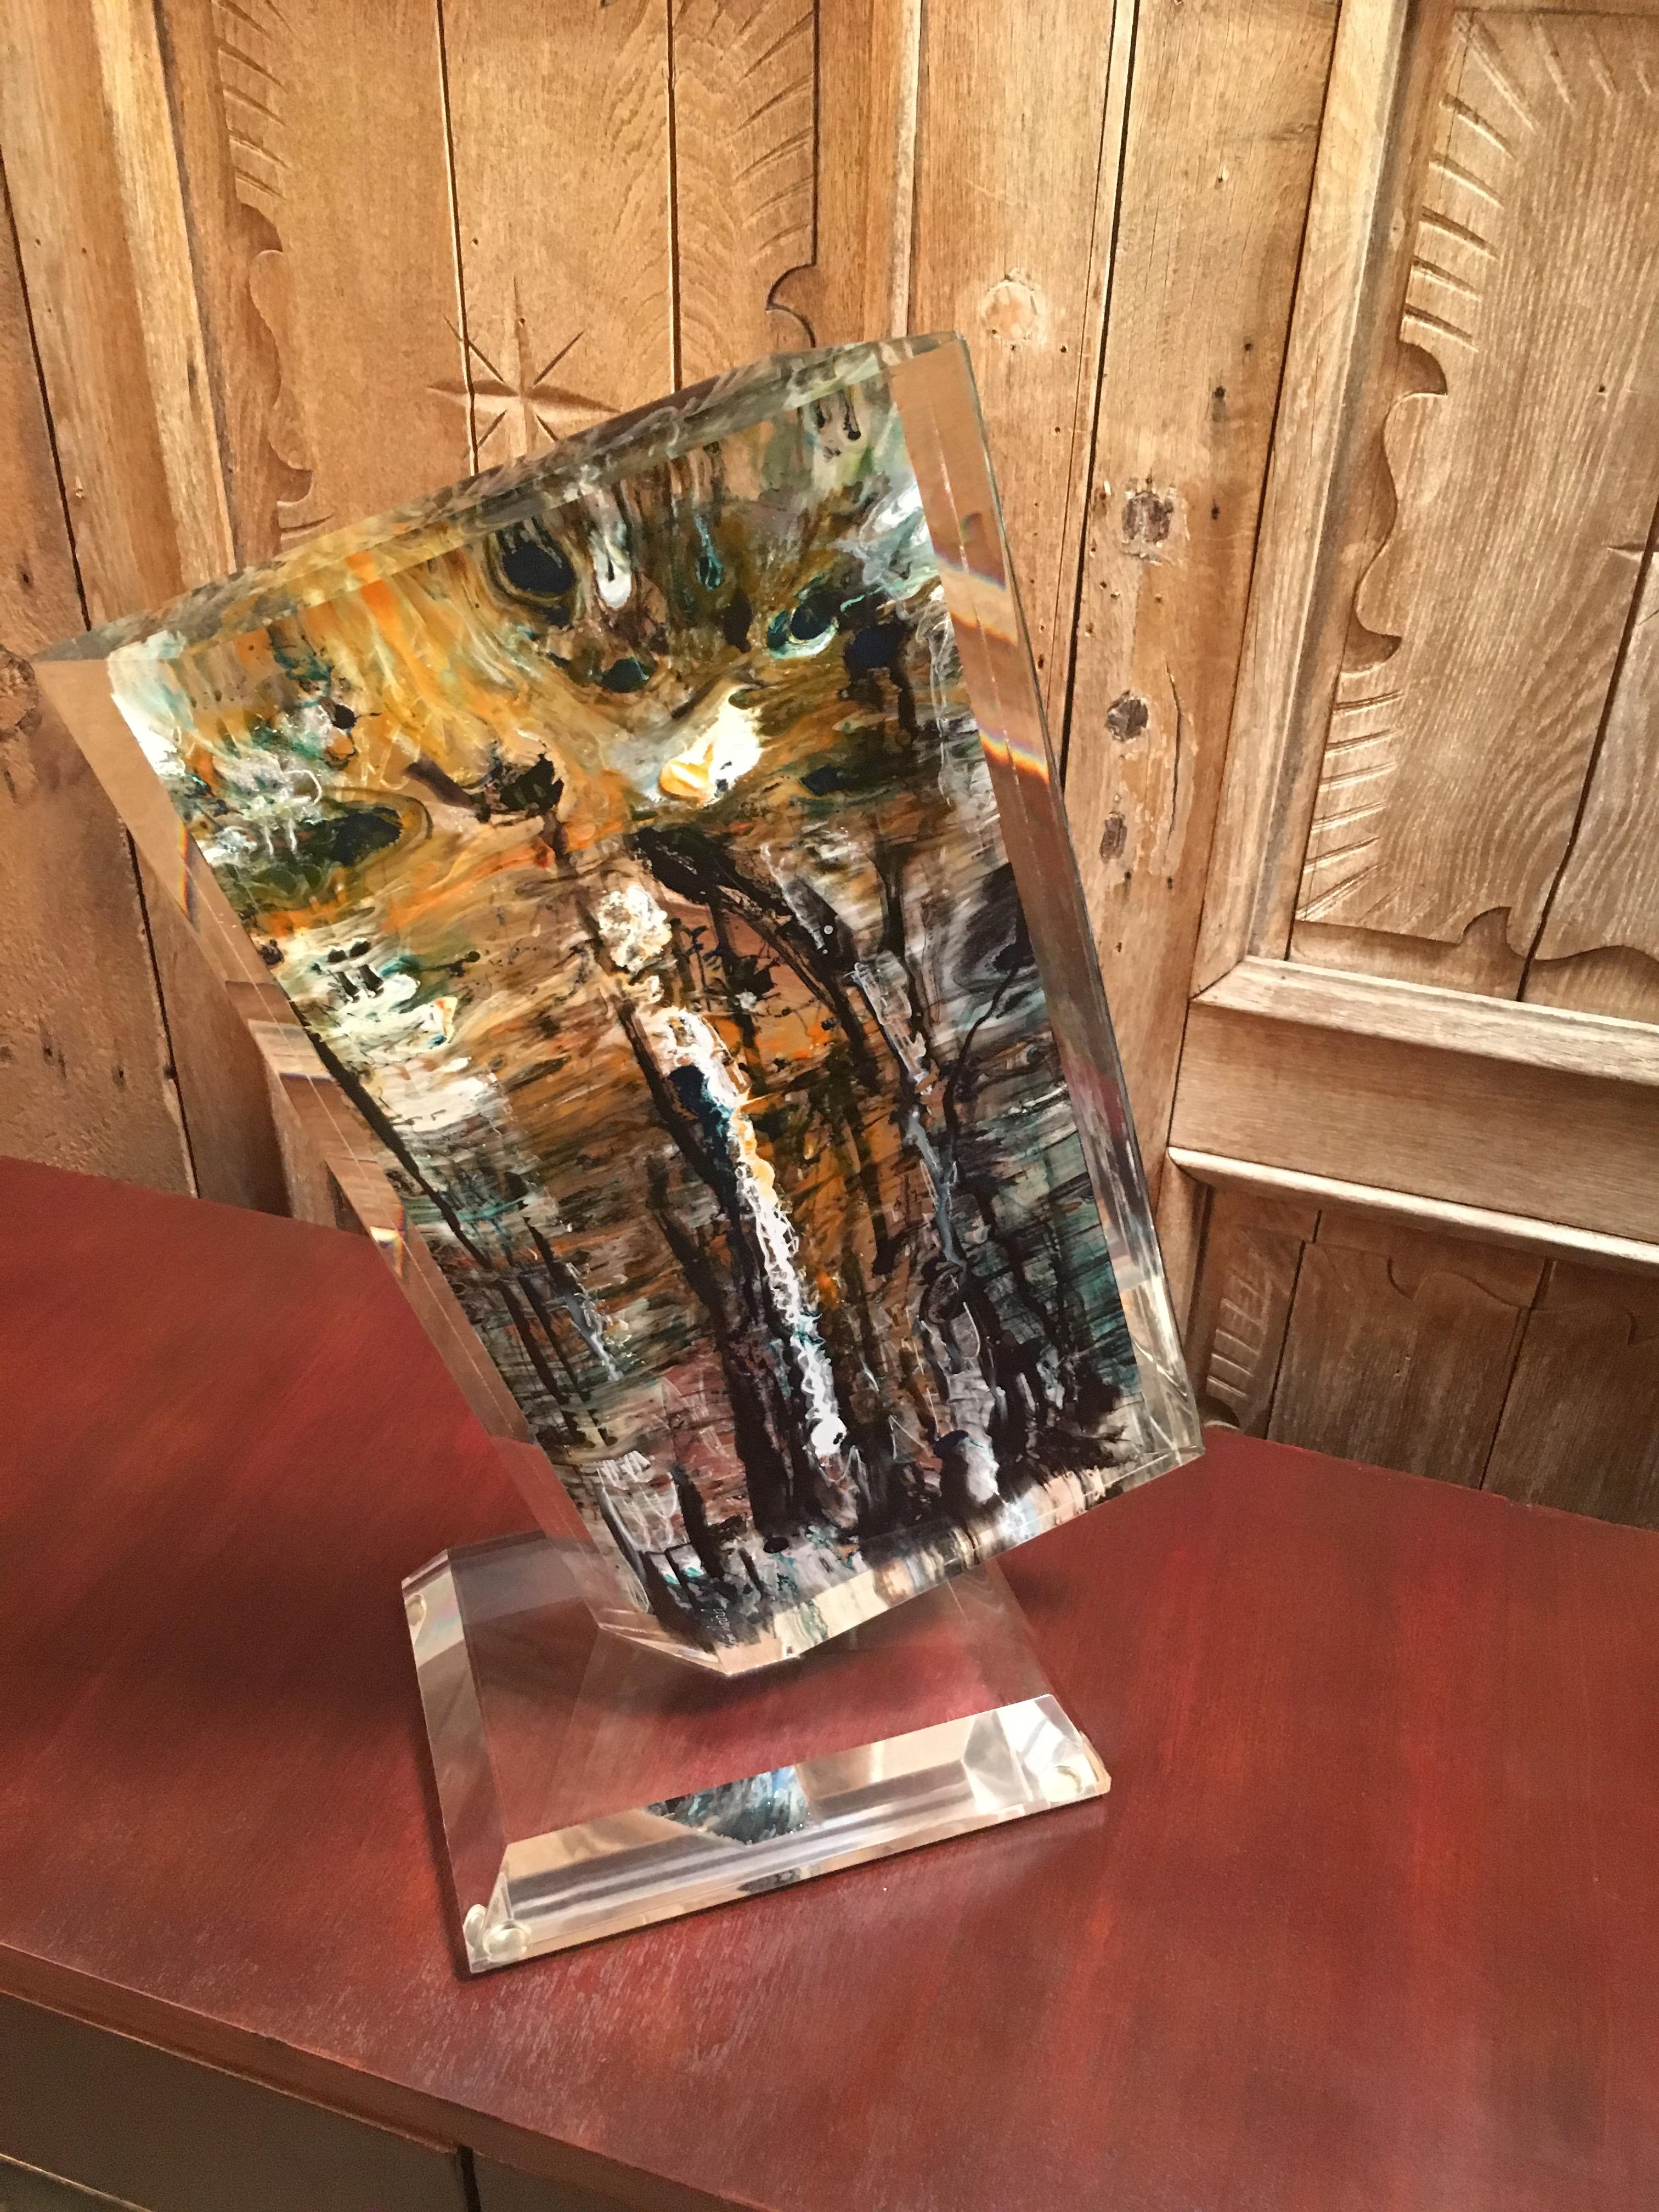 North American Abstract Wedge Lucite Sculpture by Shlomi Haziza